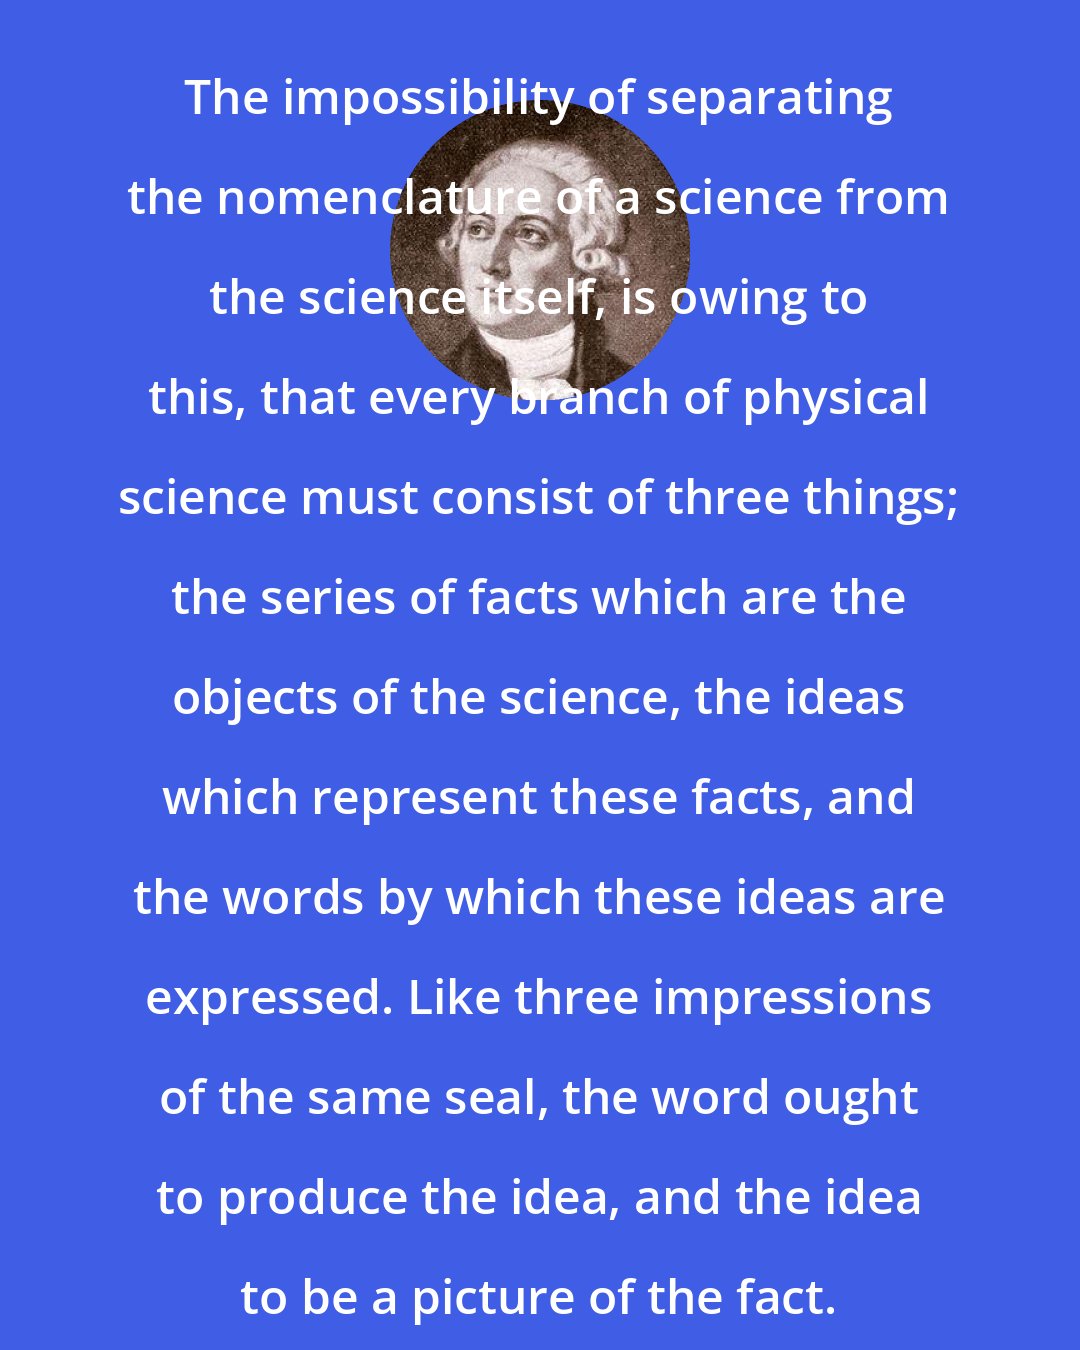 Antoine Lavoisier: The impossibility of separating the nomenclature of a science from the science itself, is owing to this, that every branch of physical science must consist of three things; the series of facts which are the objects of the science, the ideas which represent these facts, and the words by which these ideas are expressed. Like three impressions of the same seal, the word ought to produce the idea, and the idea to be a picture of the fact.